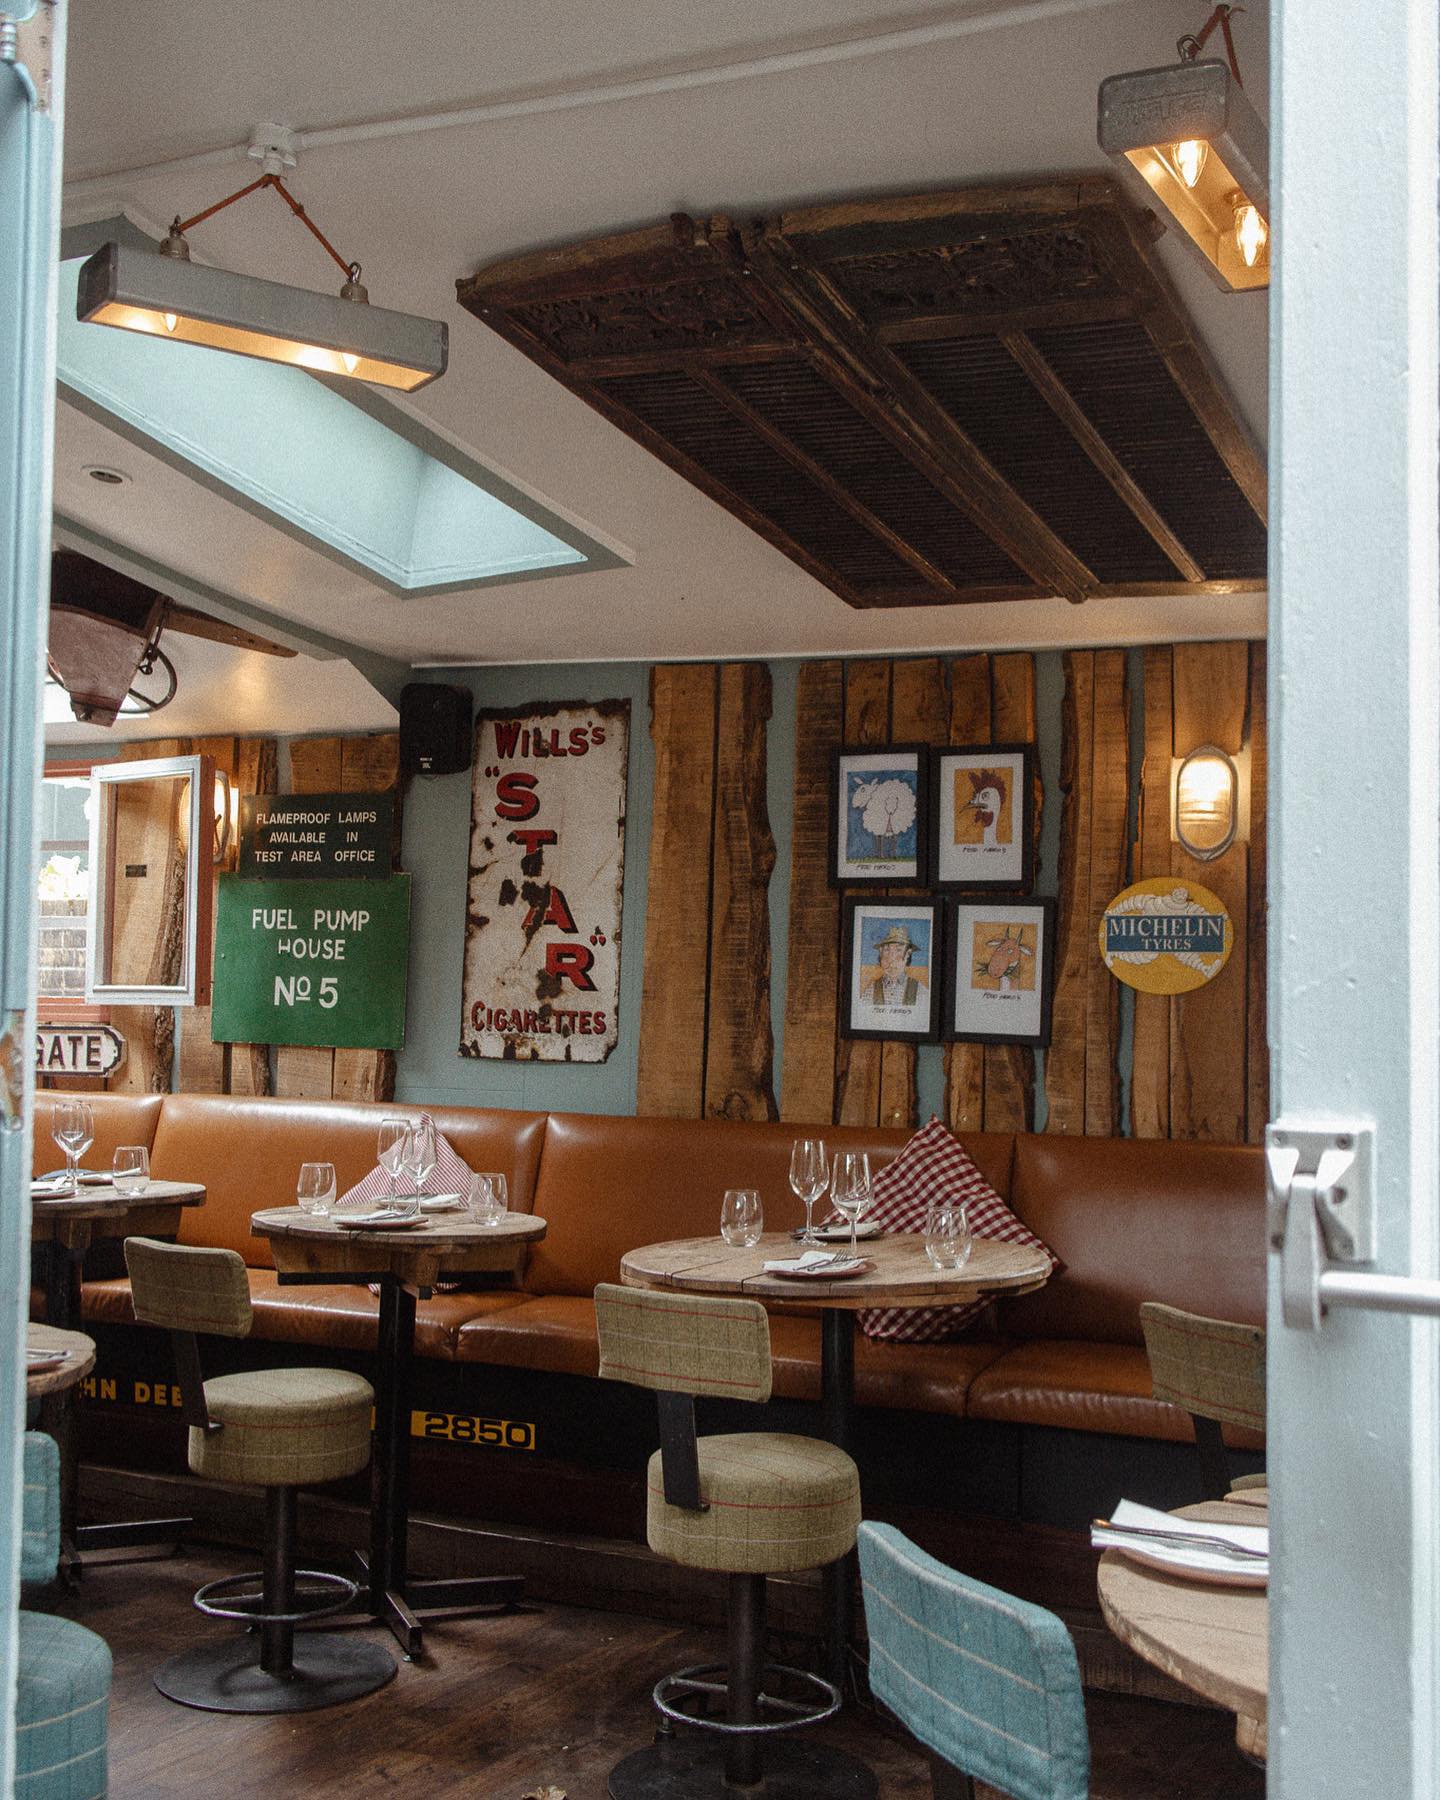 The cozy dining experience at The Shed - Warm and Cozy Restaurants in London